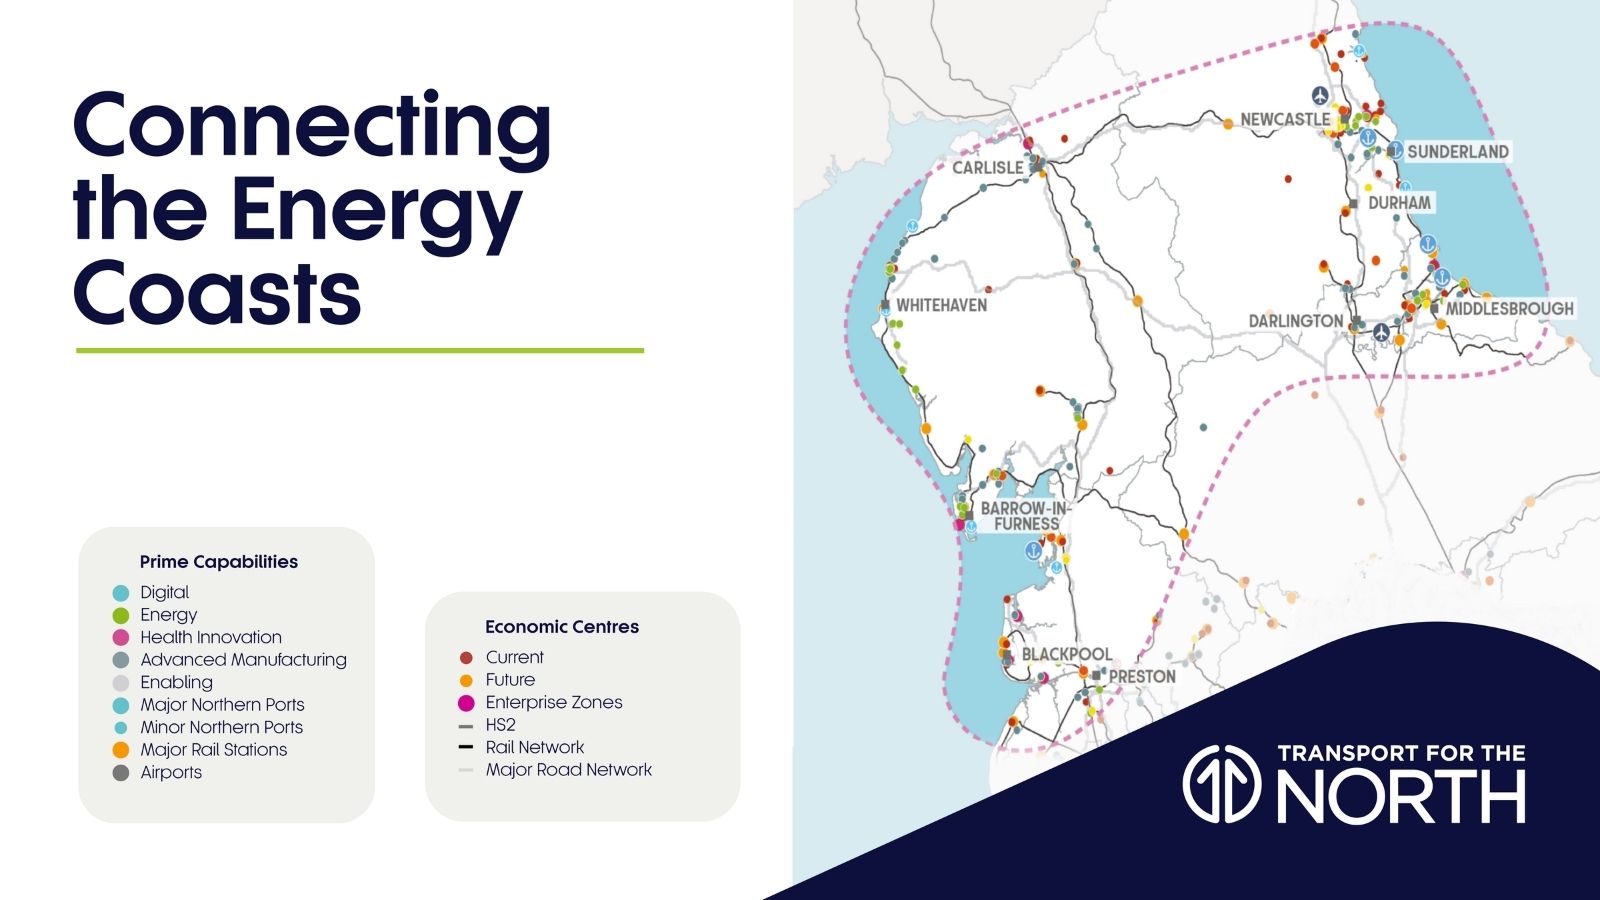 Prime Capabilities and Economic Centres Connecting the Energy Coasts